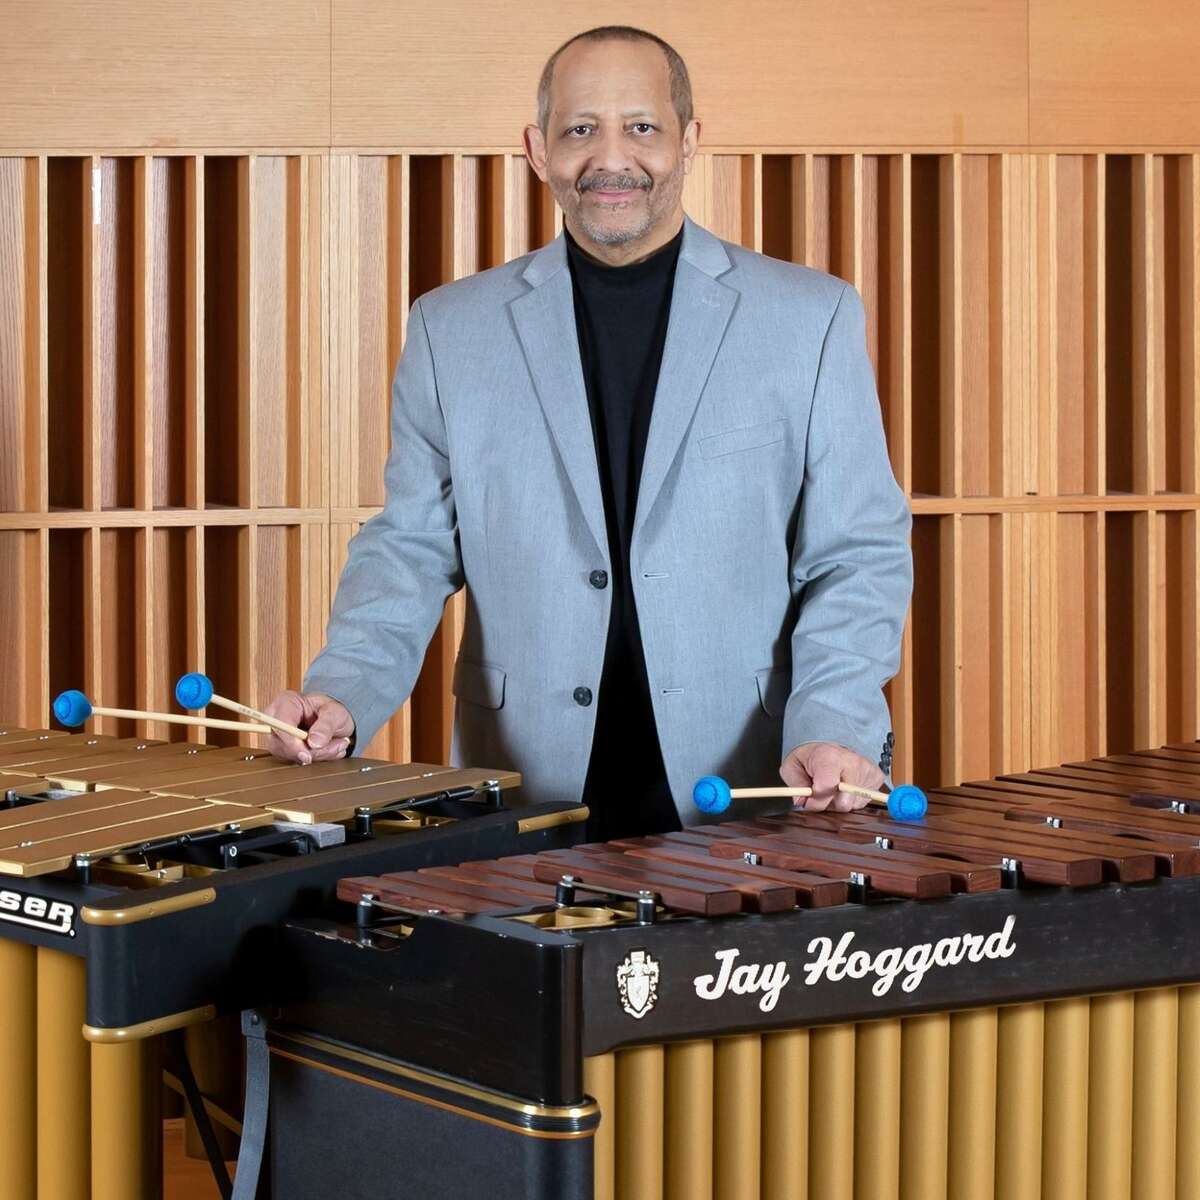 The Jay Hoggard Quartet will perform July 14 as part of Middletown’s summer concert series.